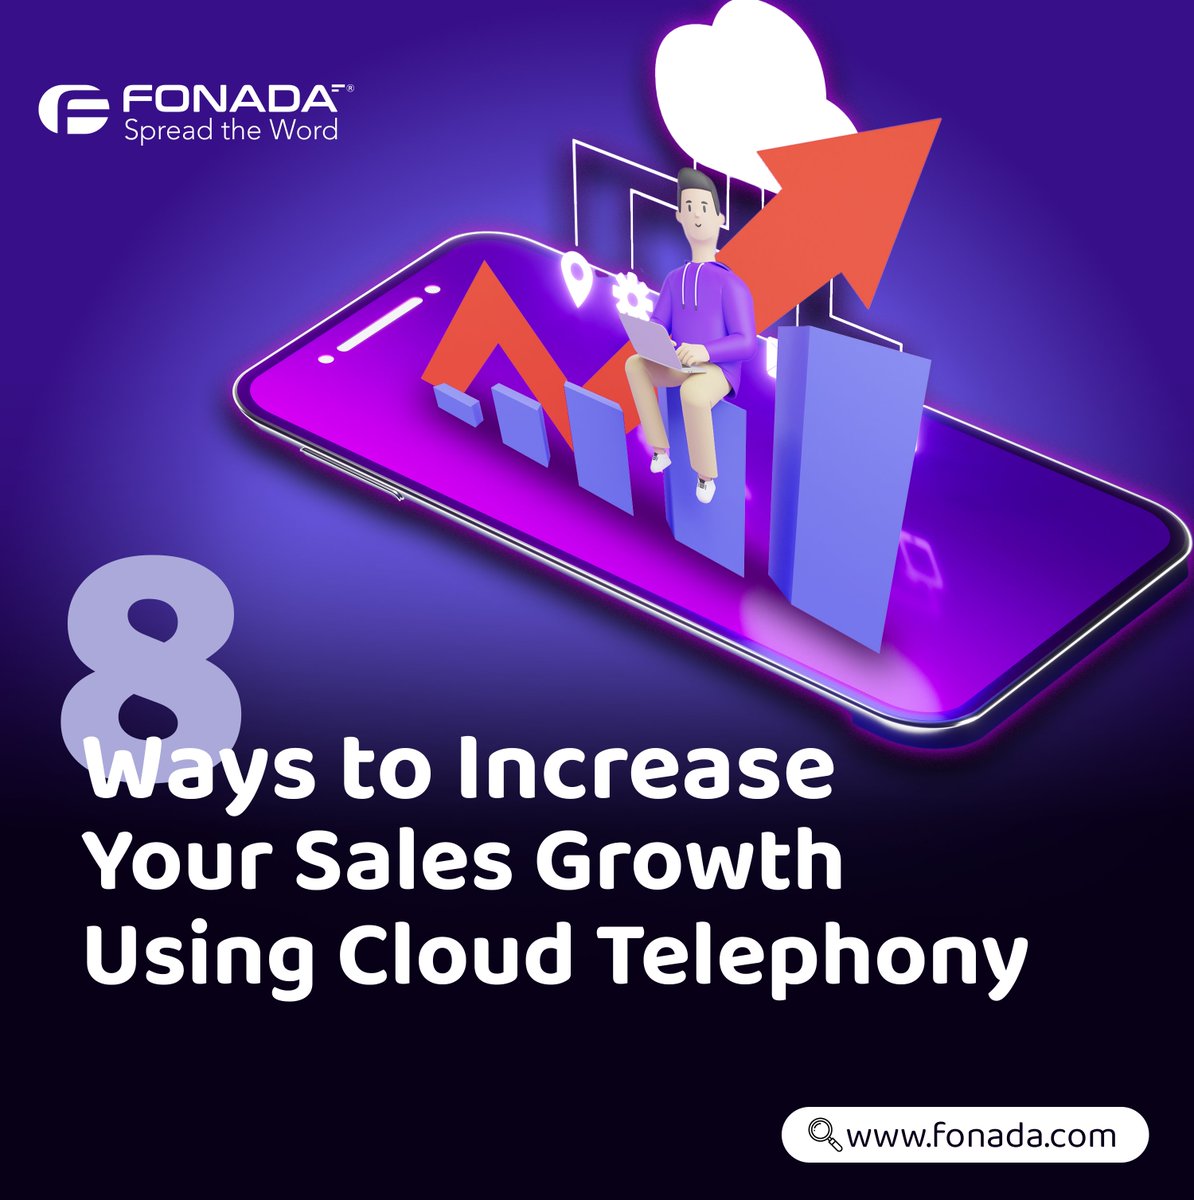 Unlock sales potential with Cloud Telephony. Boost efficiency, scale outreach, and drive growth exponentially. Get started today!

#fonada #cloudtelephony #Cloudcallsolutions #OBD #Cloudcontactcenter #Salesgrowth #Salespitch